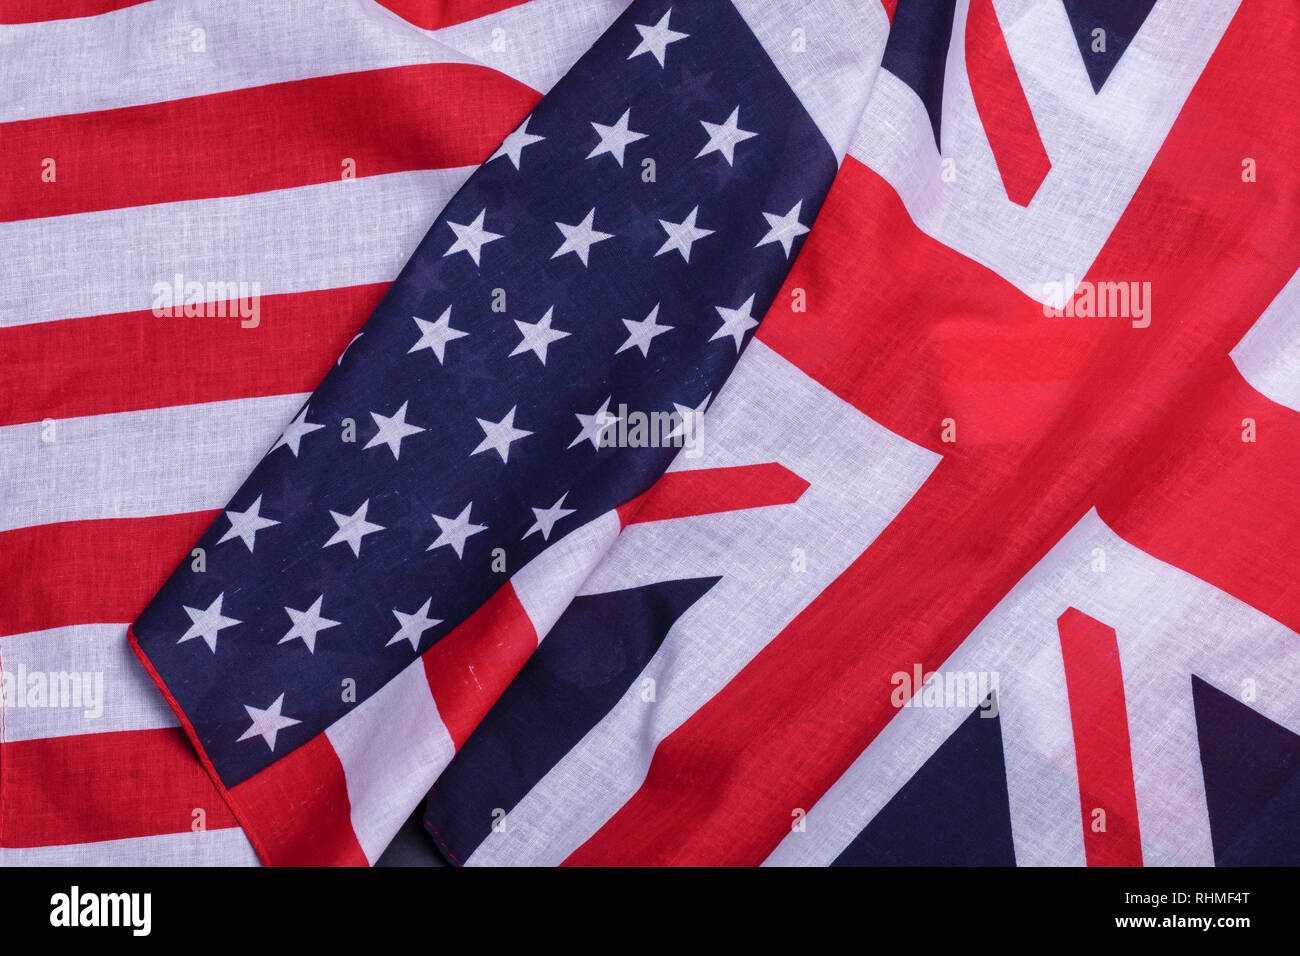 Two flags English union jack and USA star spangled banner. Material symbols of first world countries Stock Photo